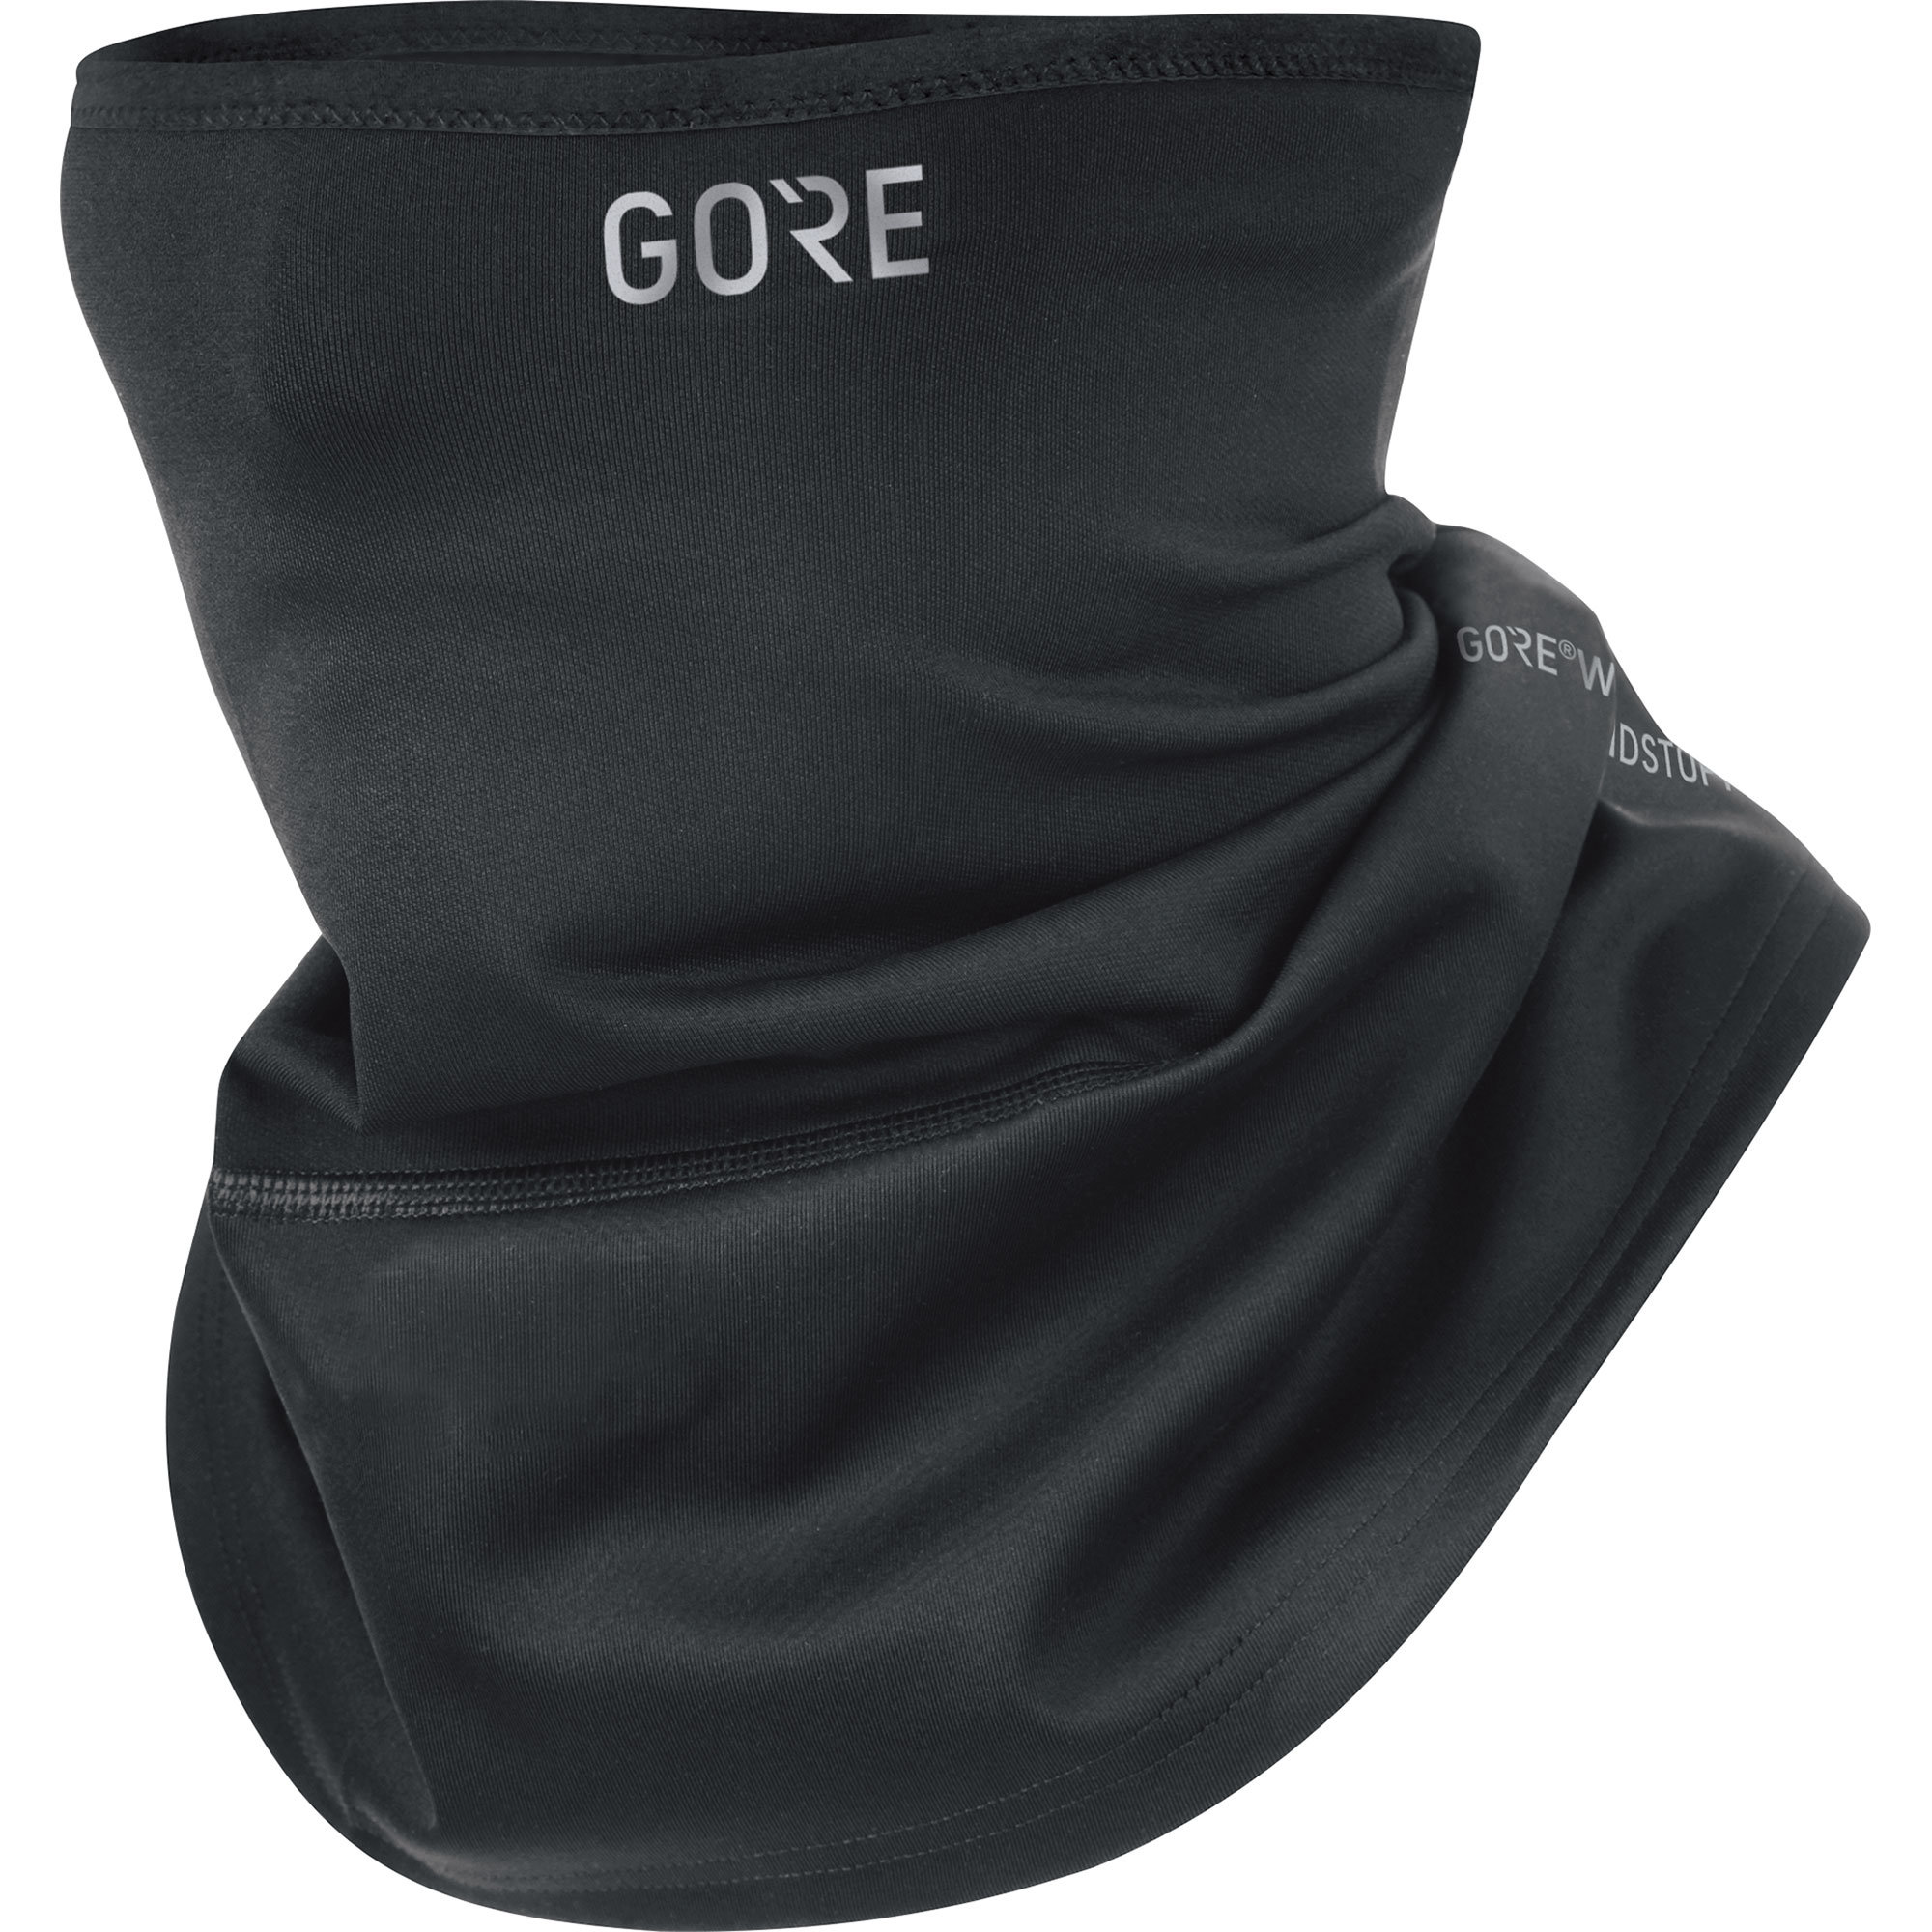 GORE M GORE WINDSTOPPER Neck and Face Warmer - Wheelworks 